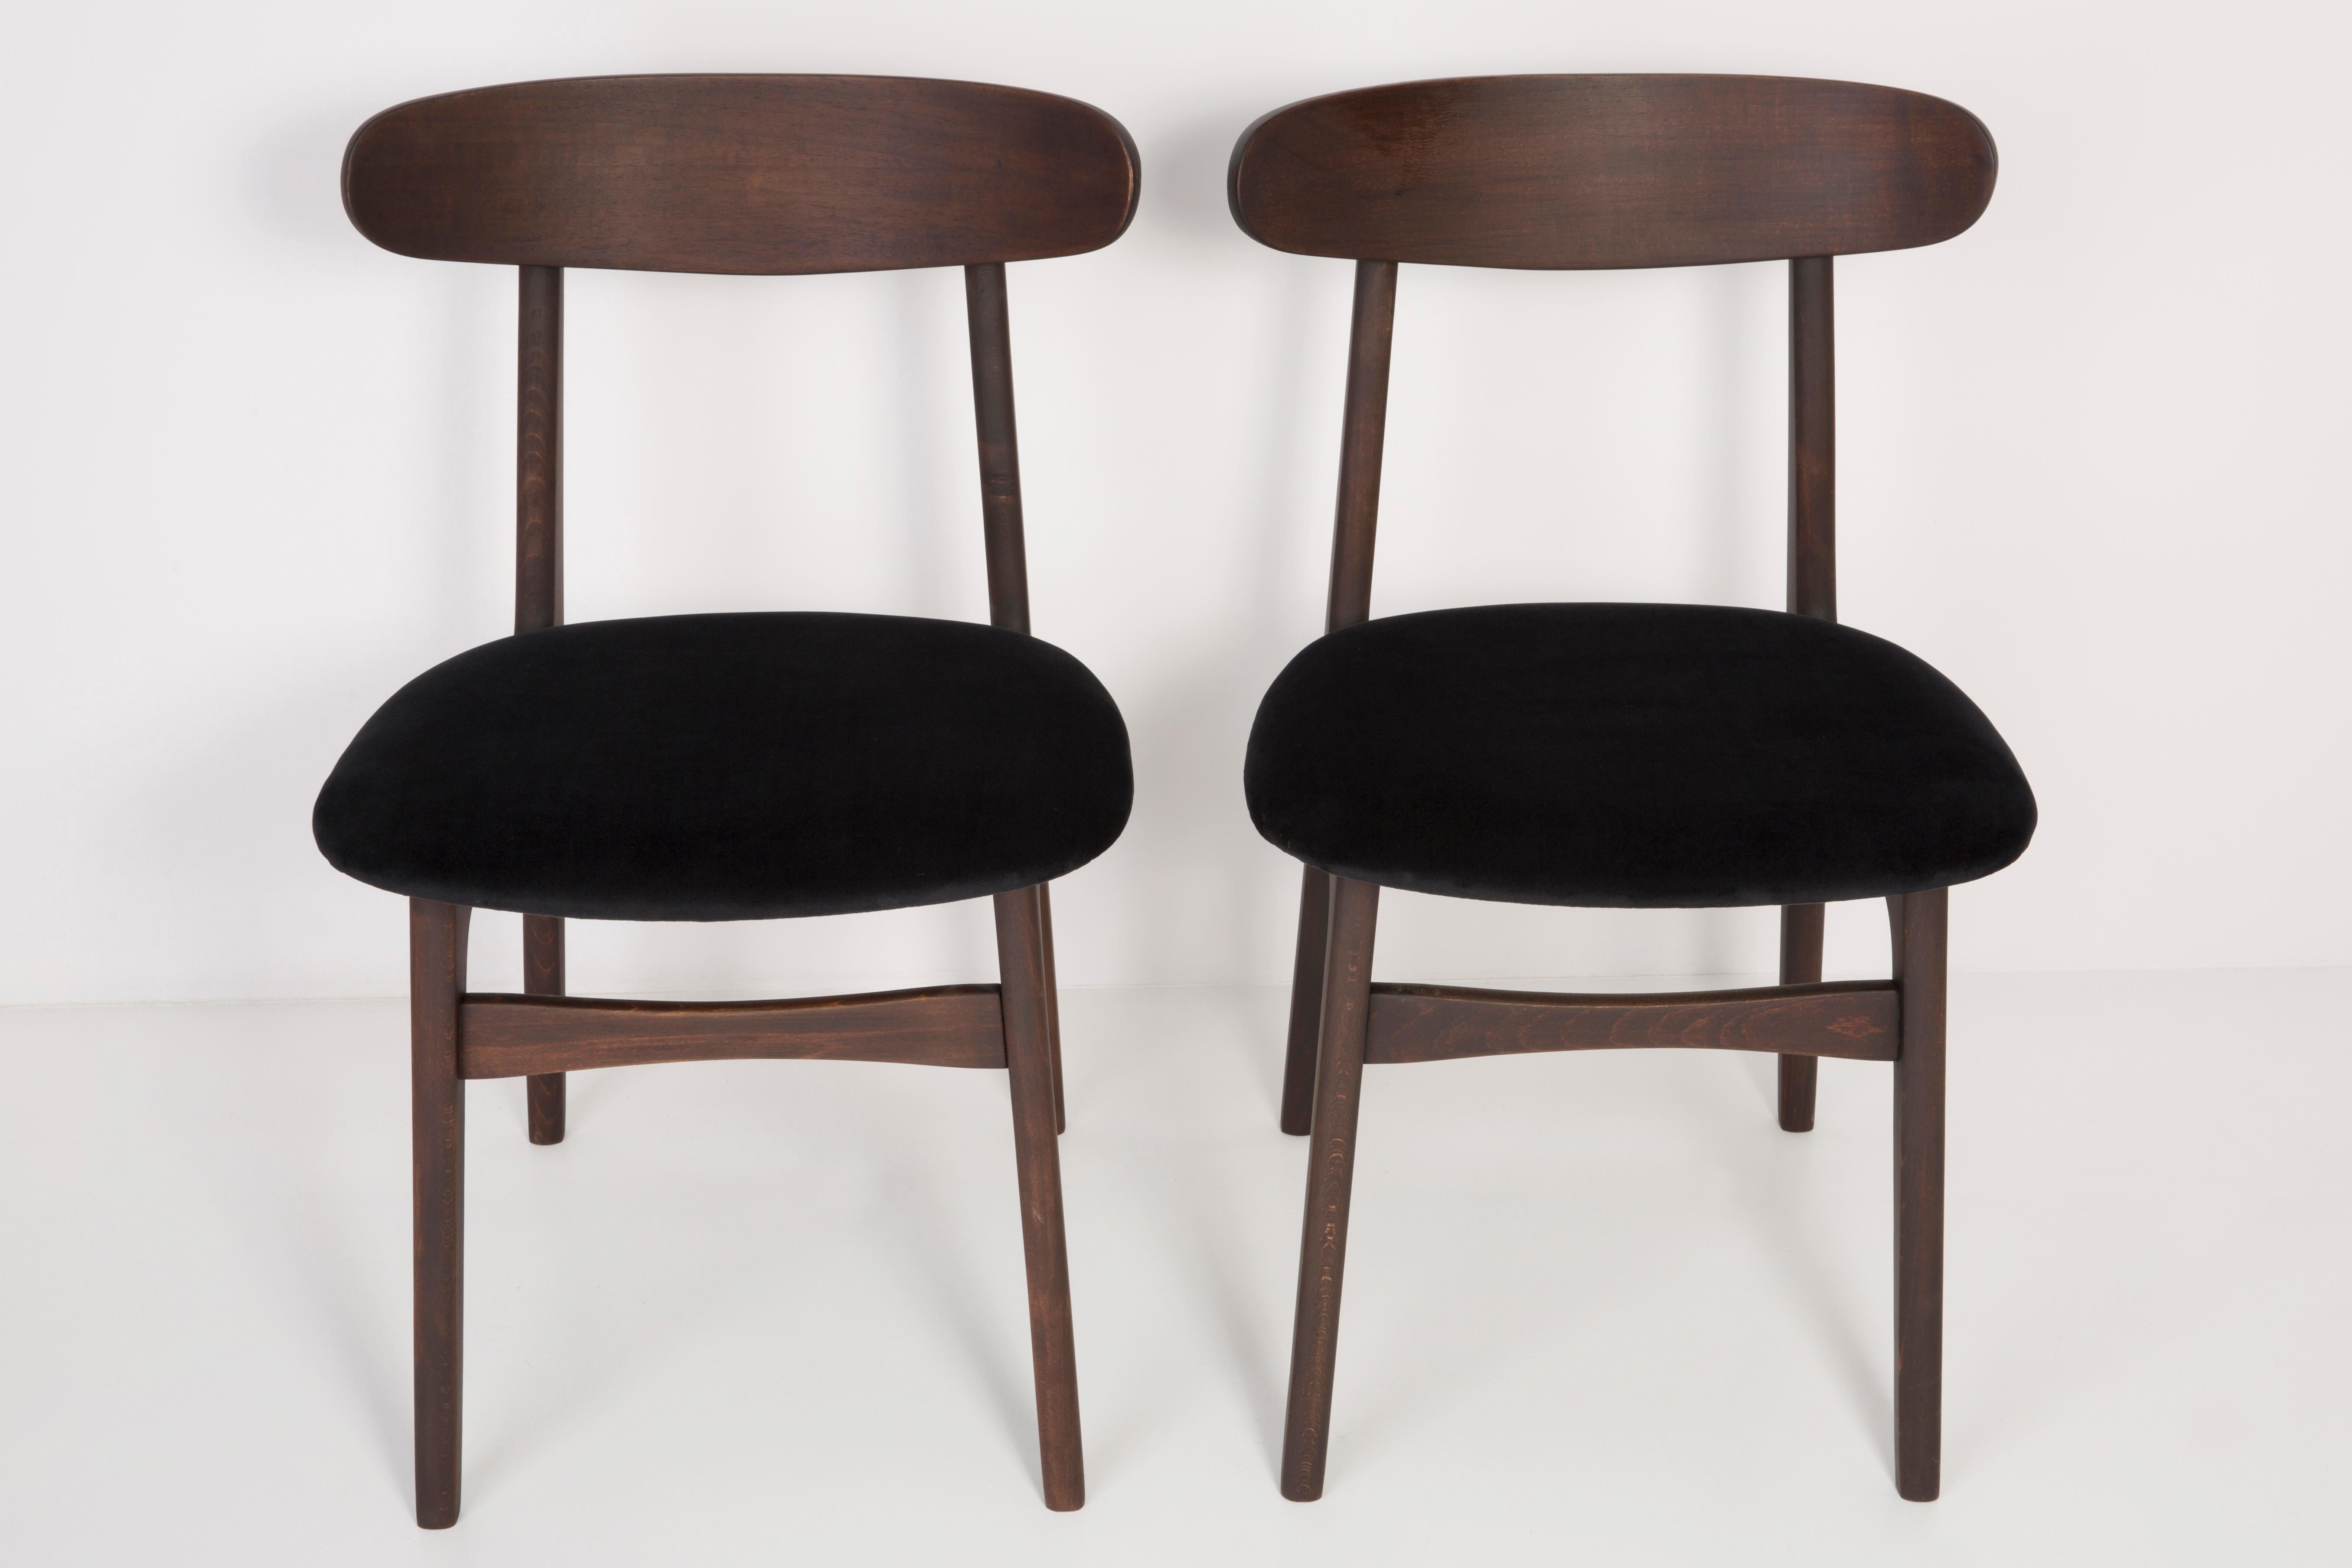 Chairs designed by Prof. Rajmund Halas. Made of beechwood. Chair is after a complete upholstery renovation; the woodwork has been refreshed. Seat and back is dressed in black, durable and pleasant to the touch velvet fabric. Chair is stabile and